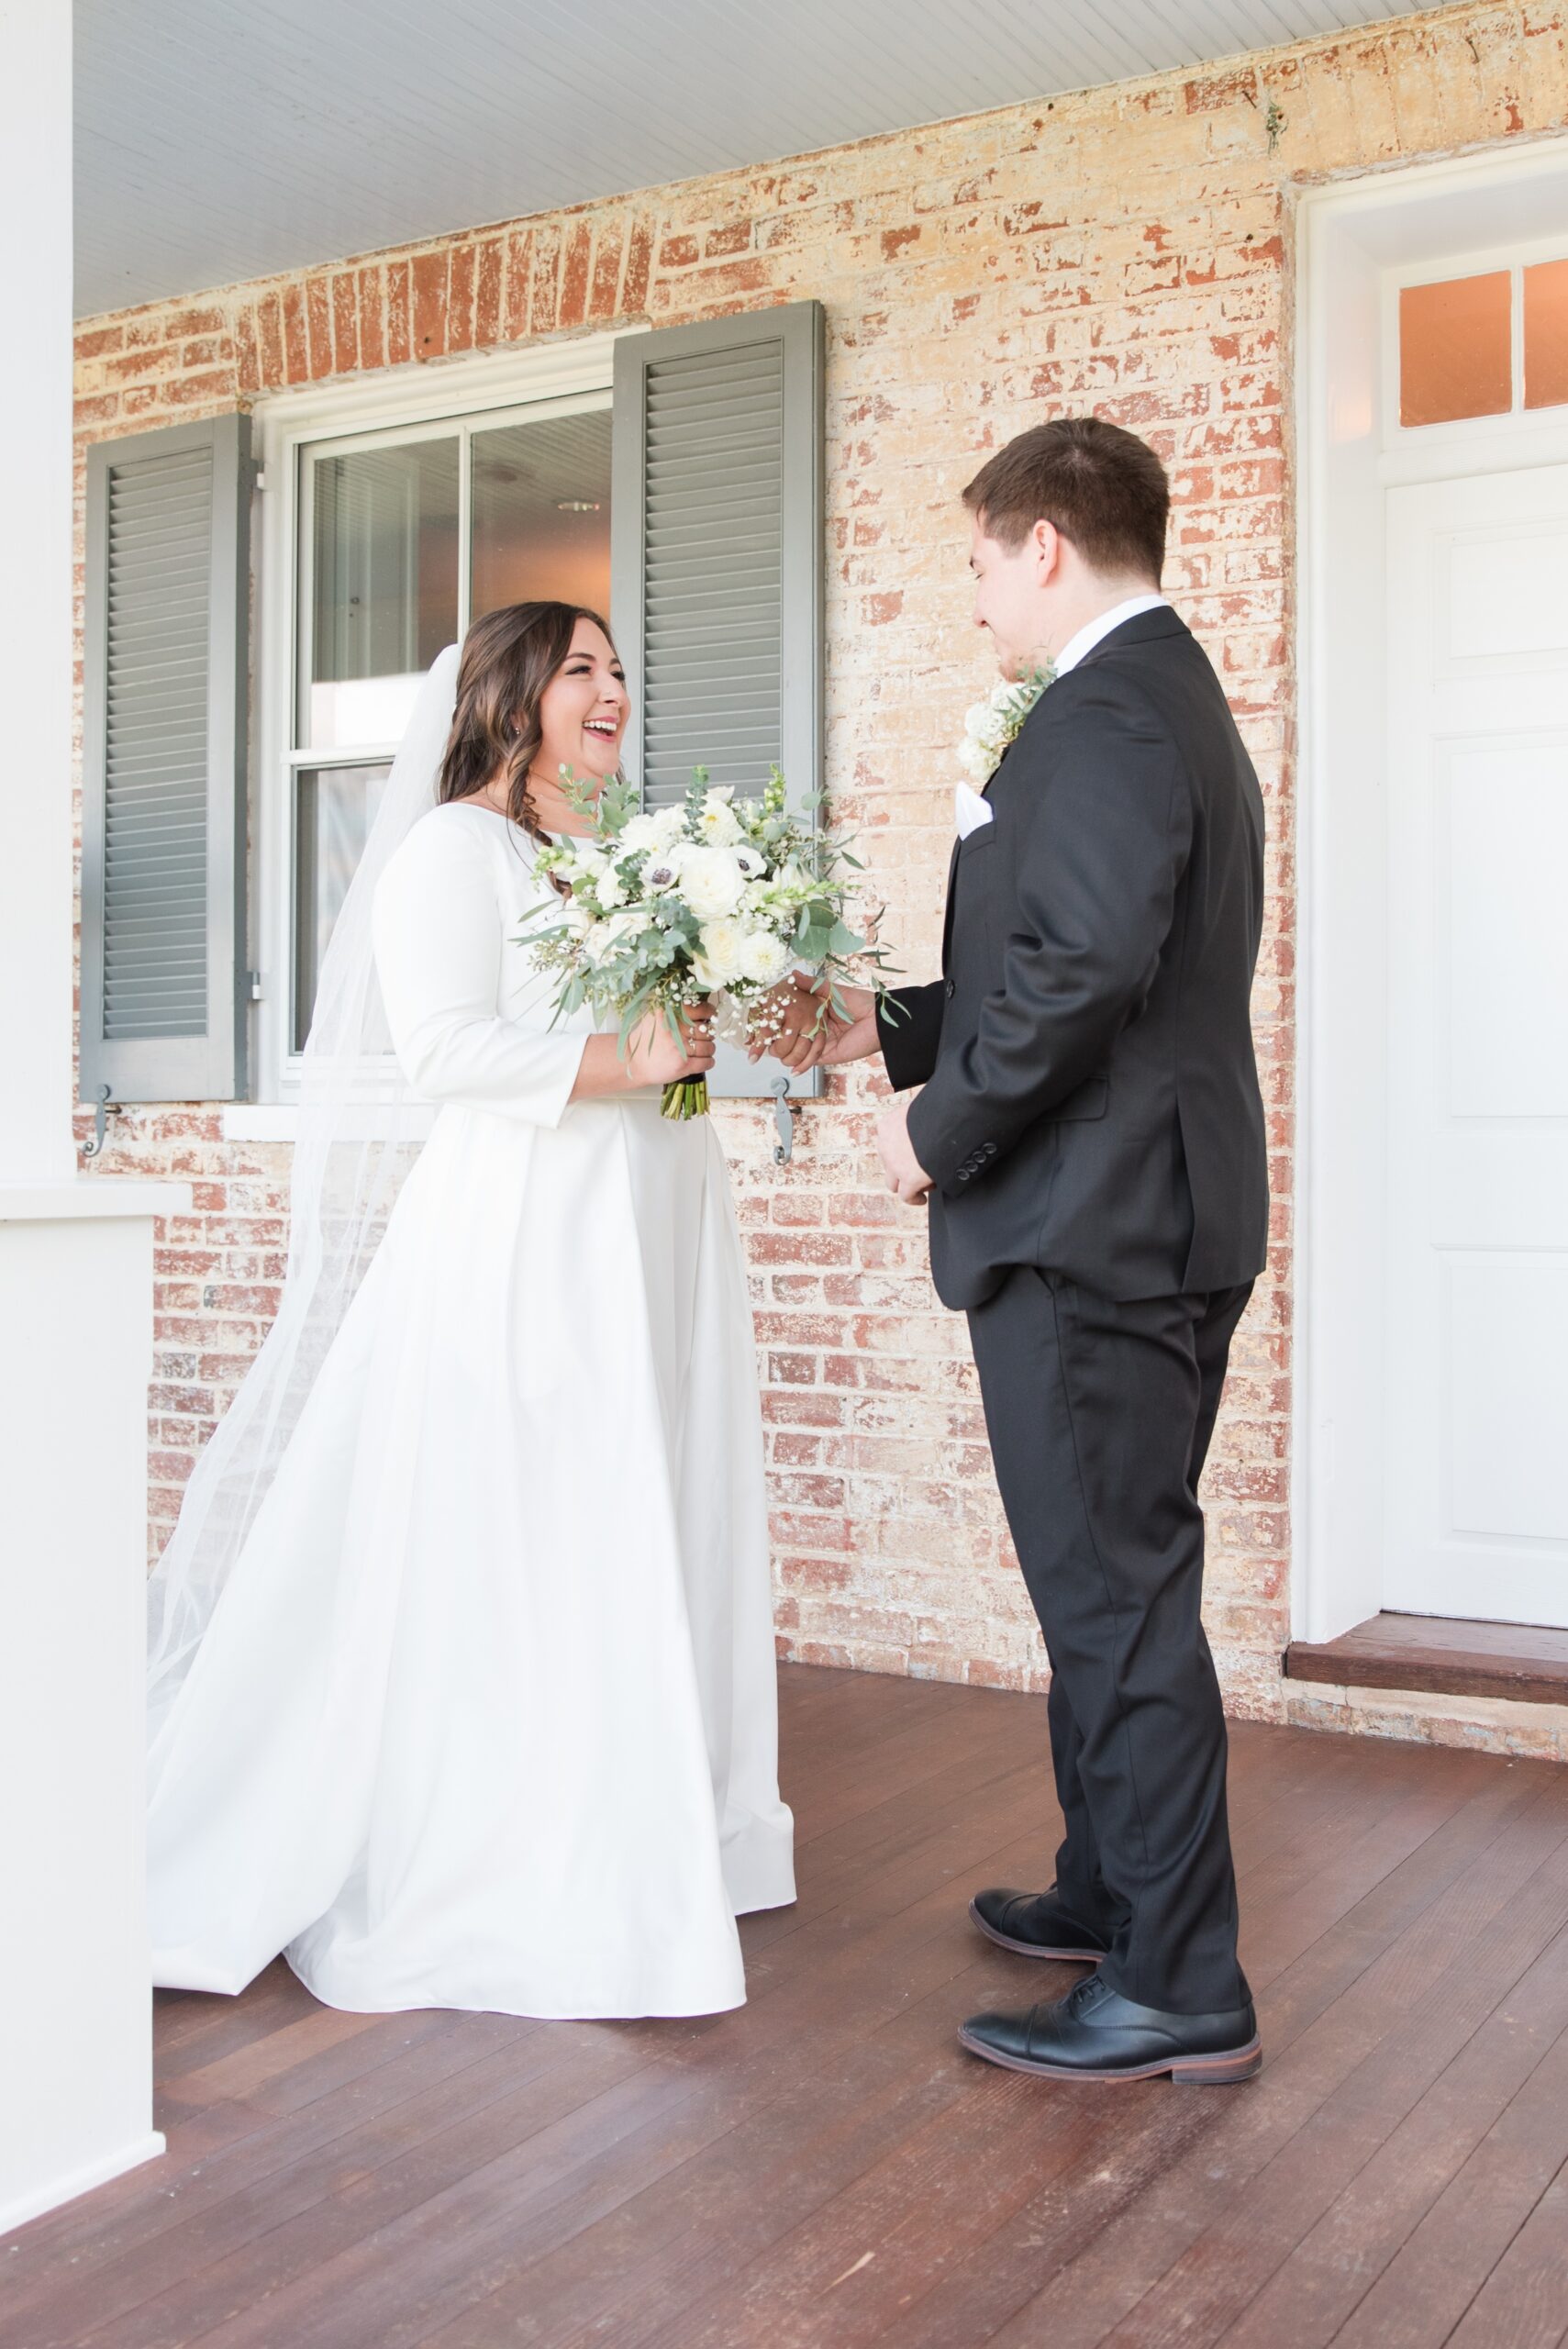 A bride and groom happily share a first look moment on the front porch